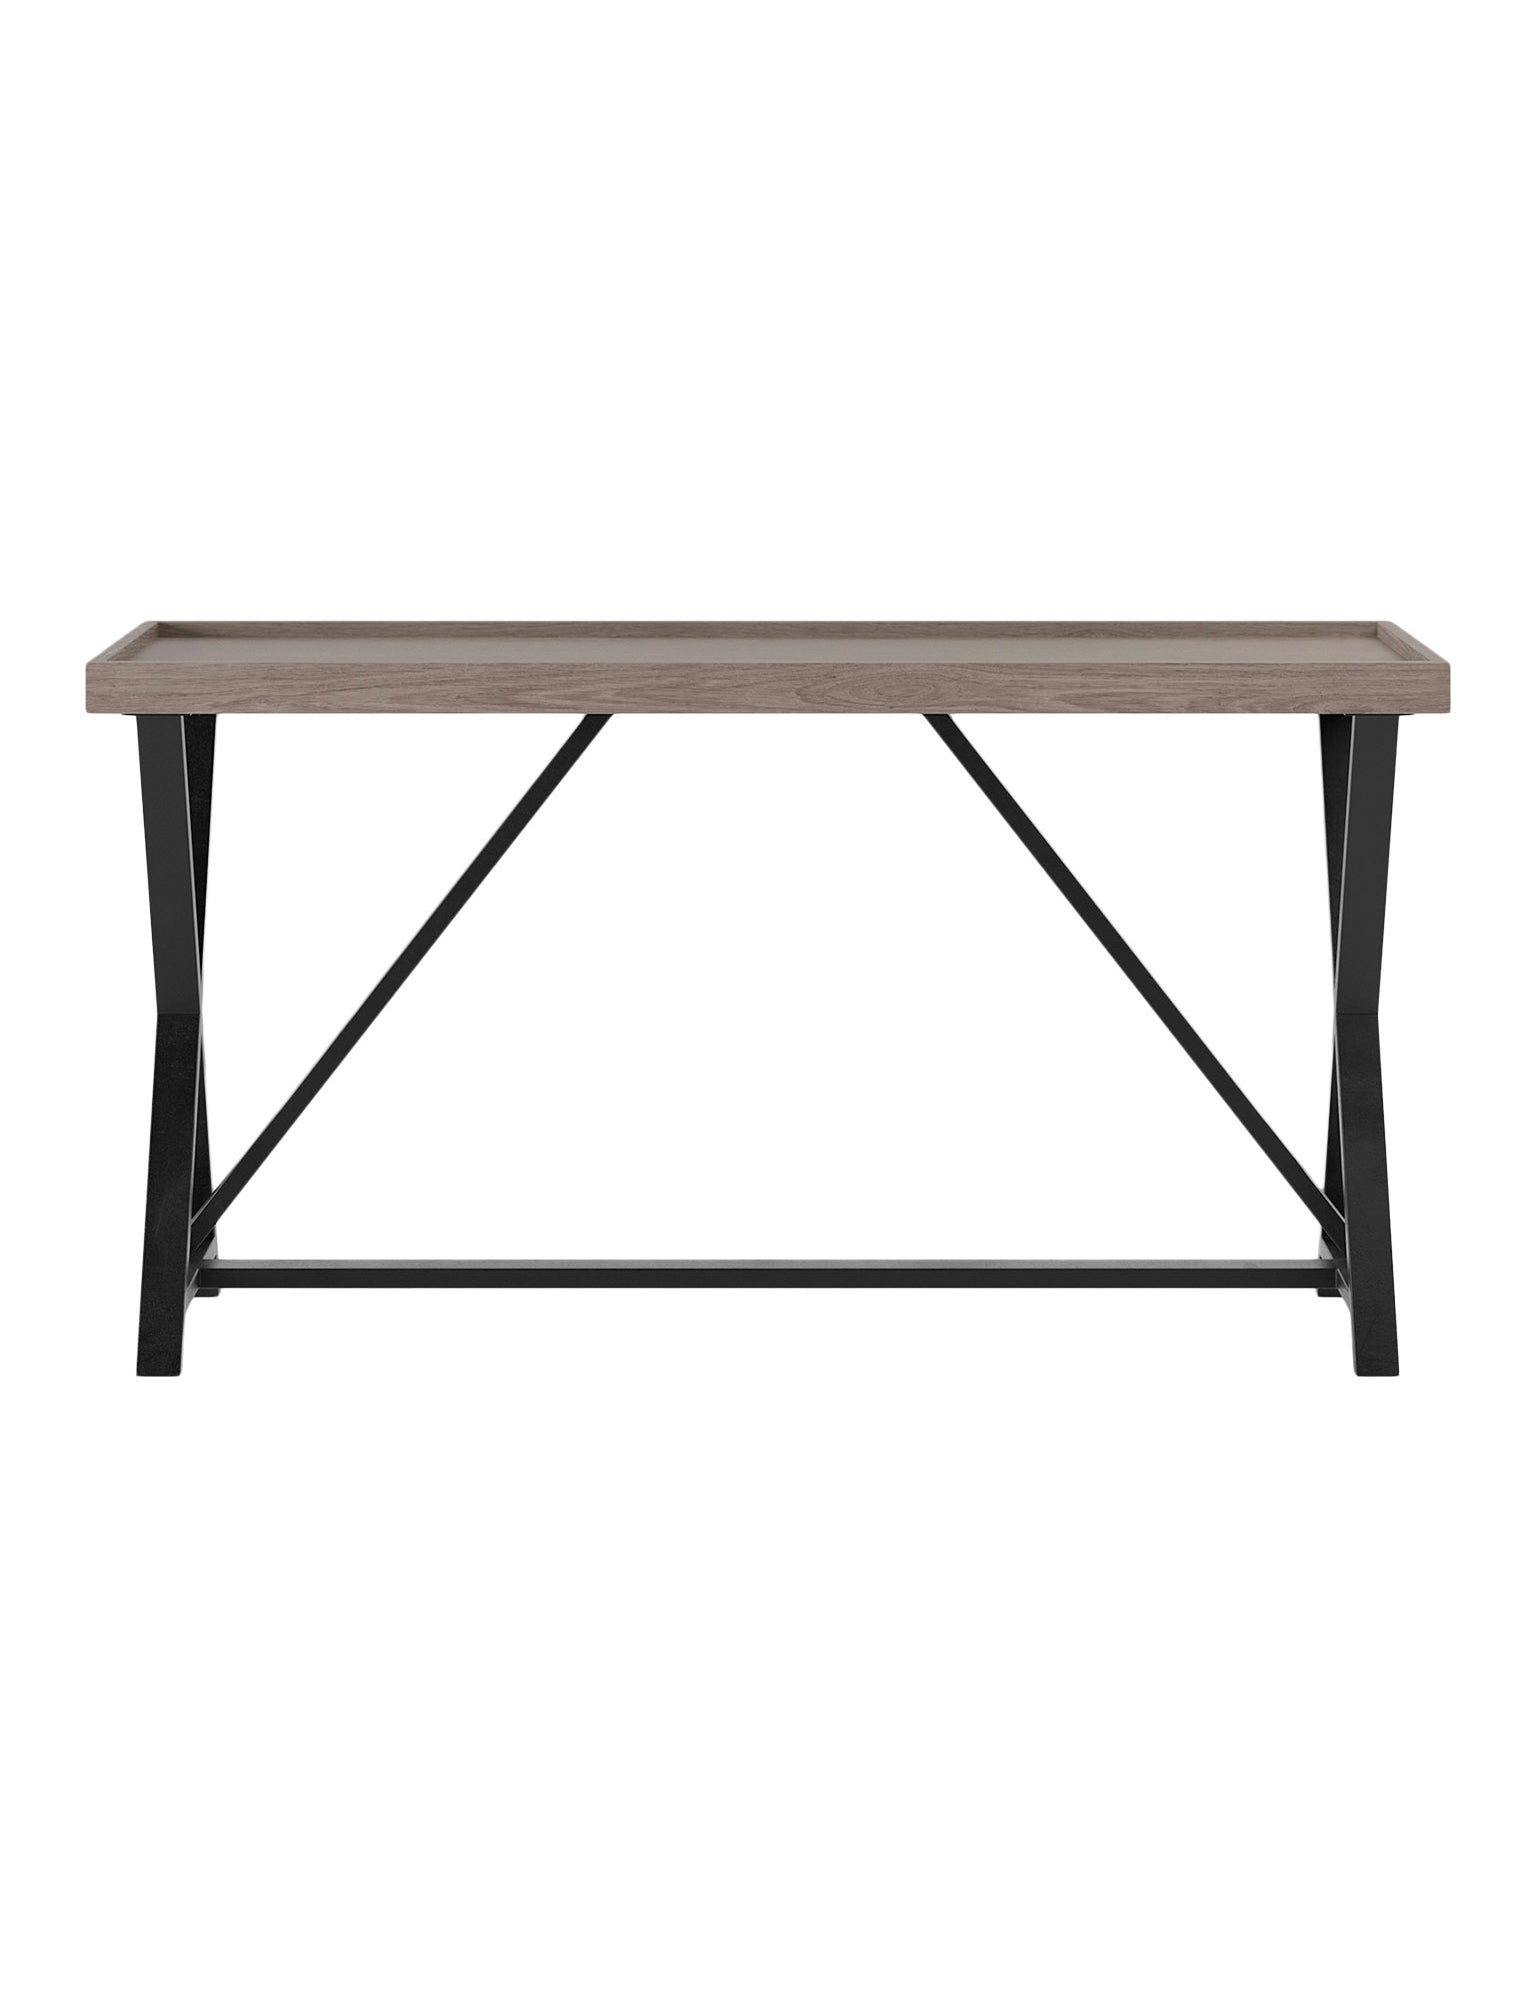 Wooden console table with black metal legs